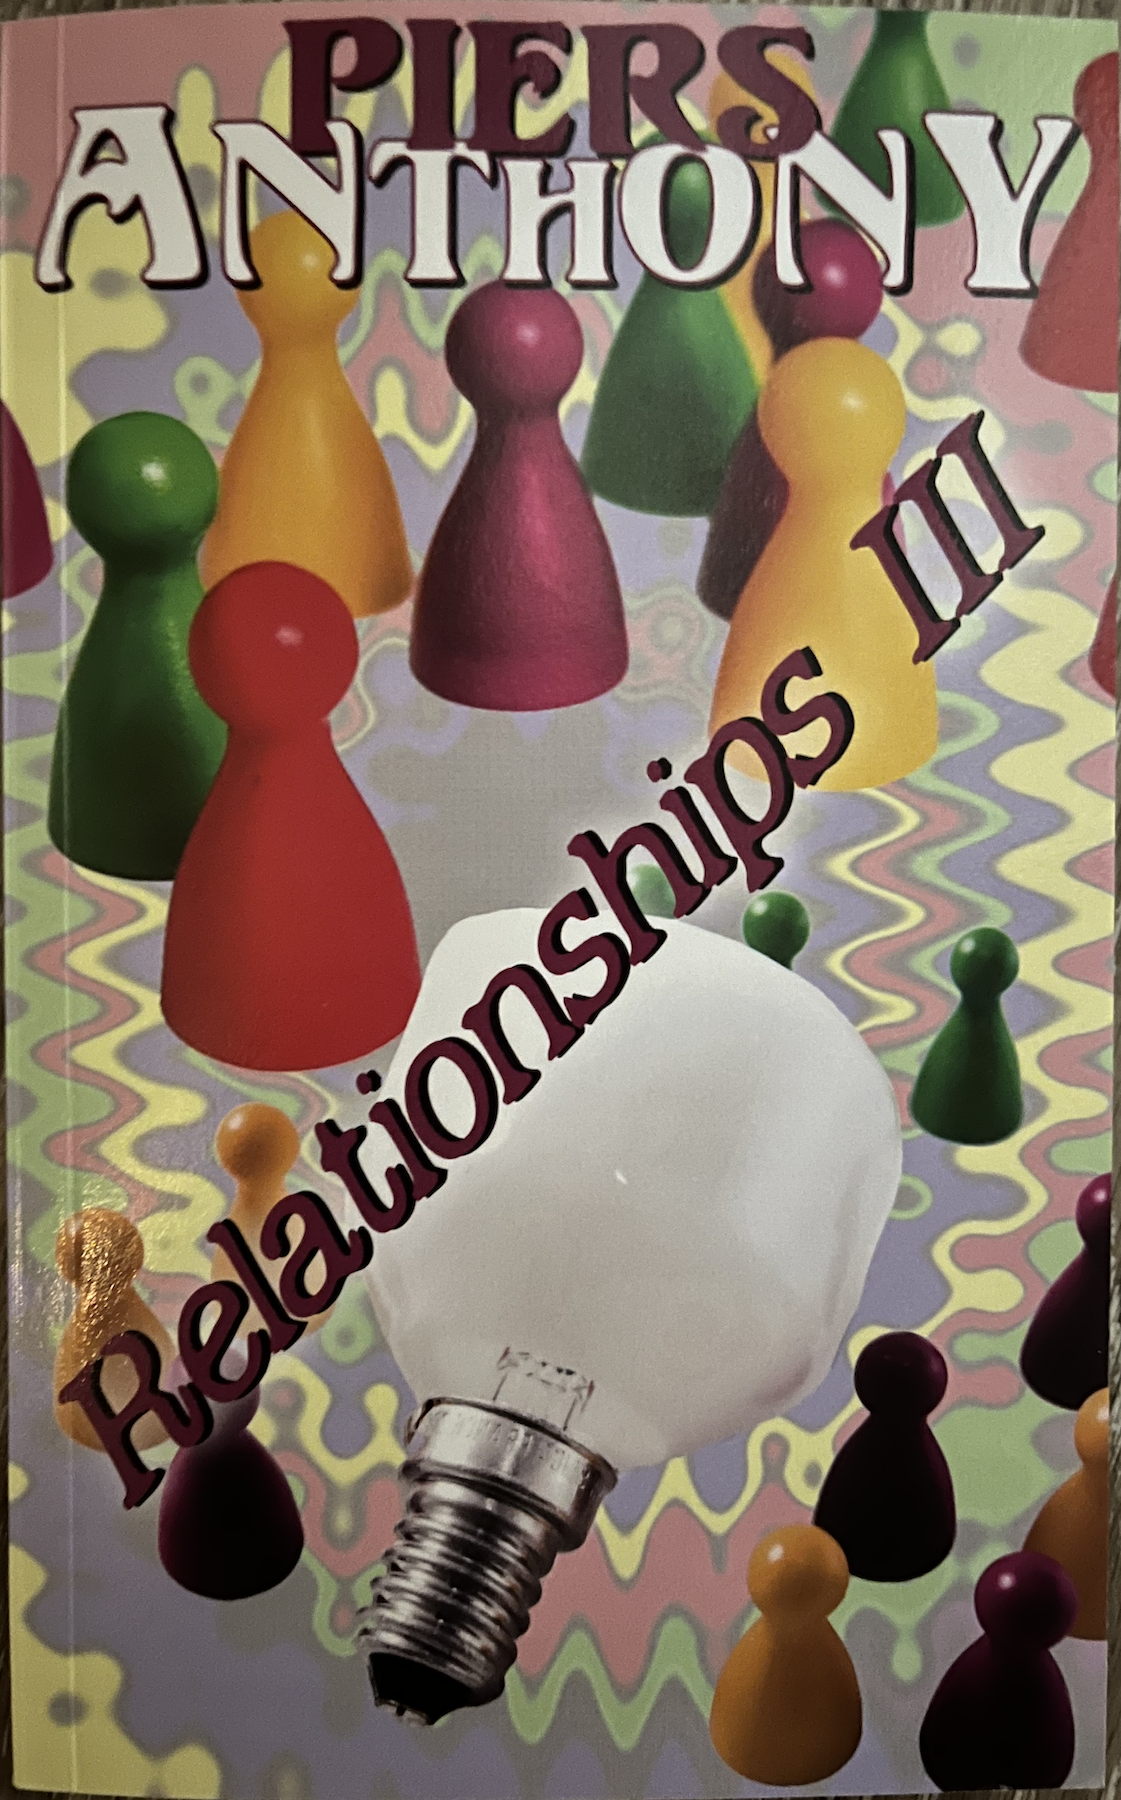 Relationships III paperback cover